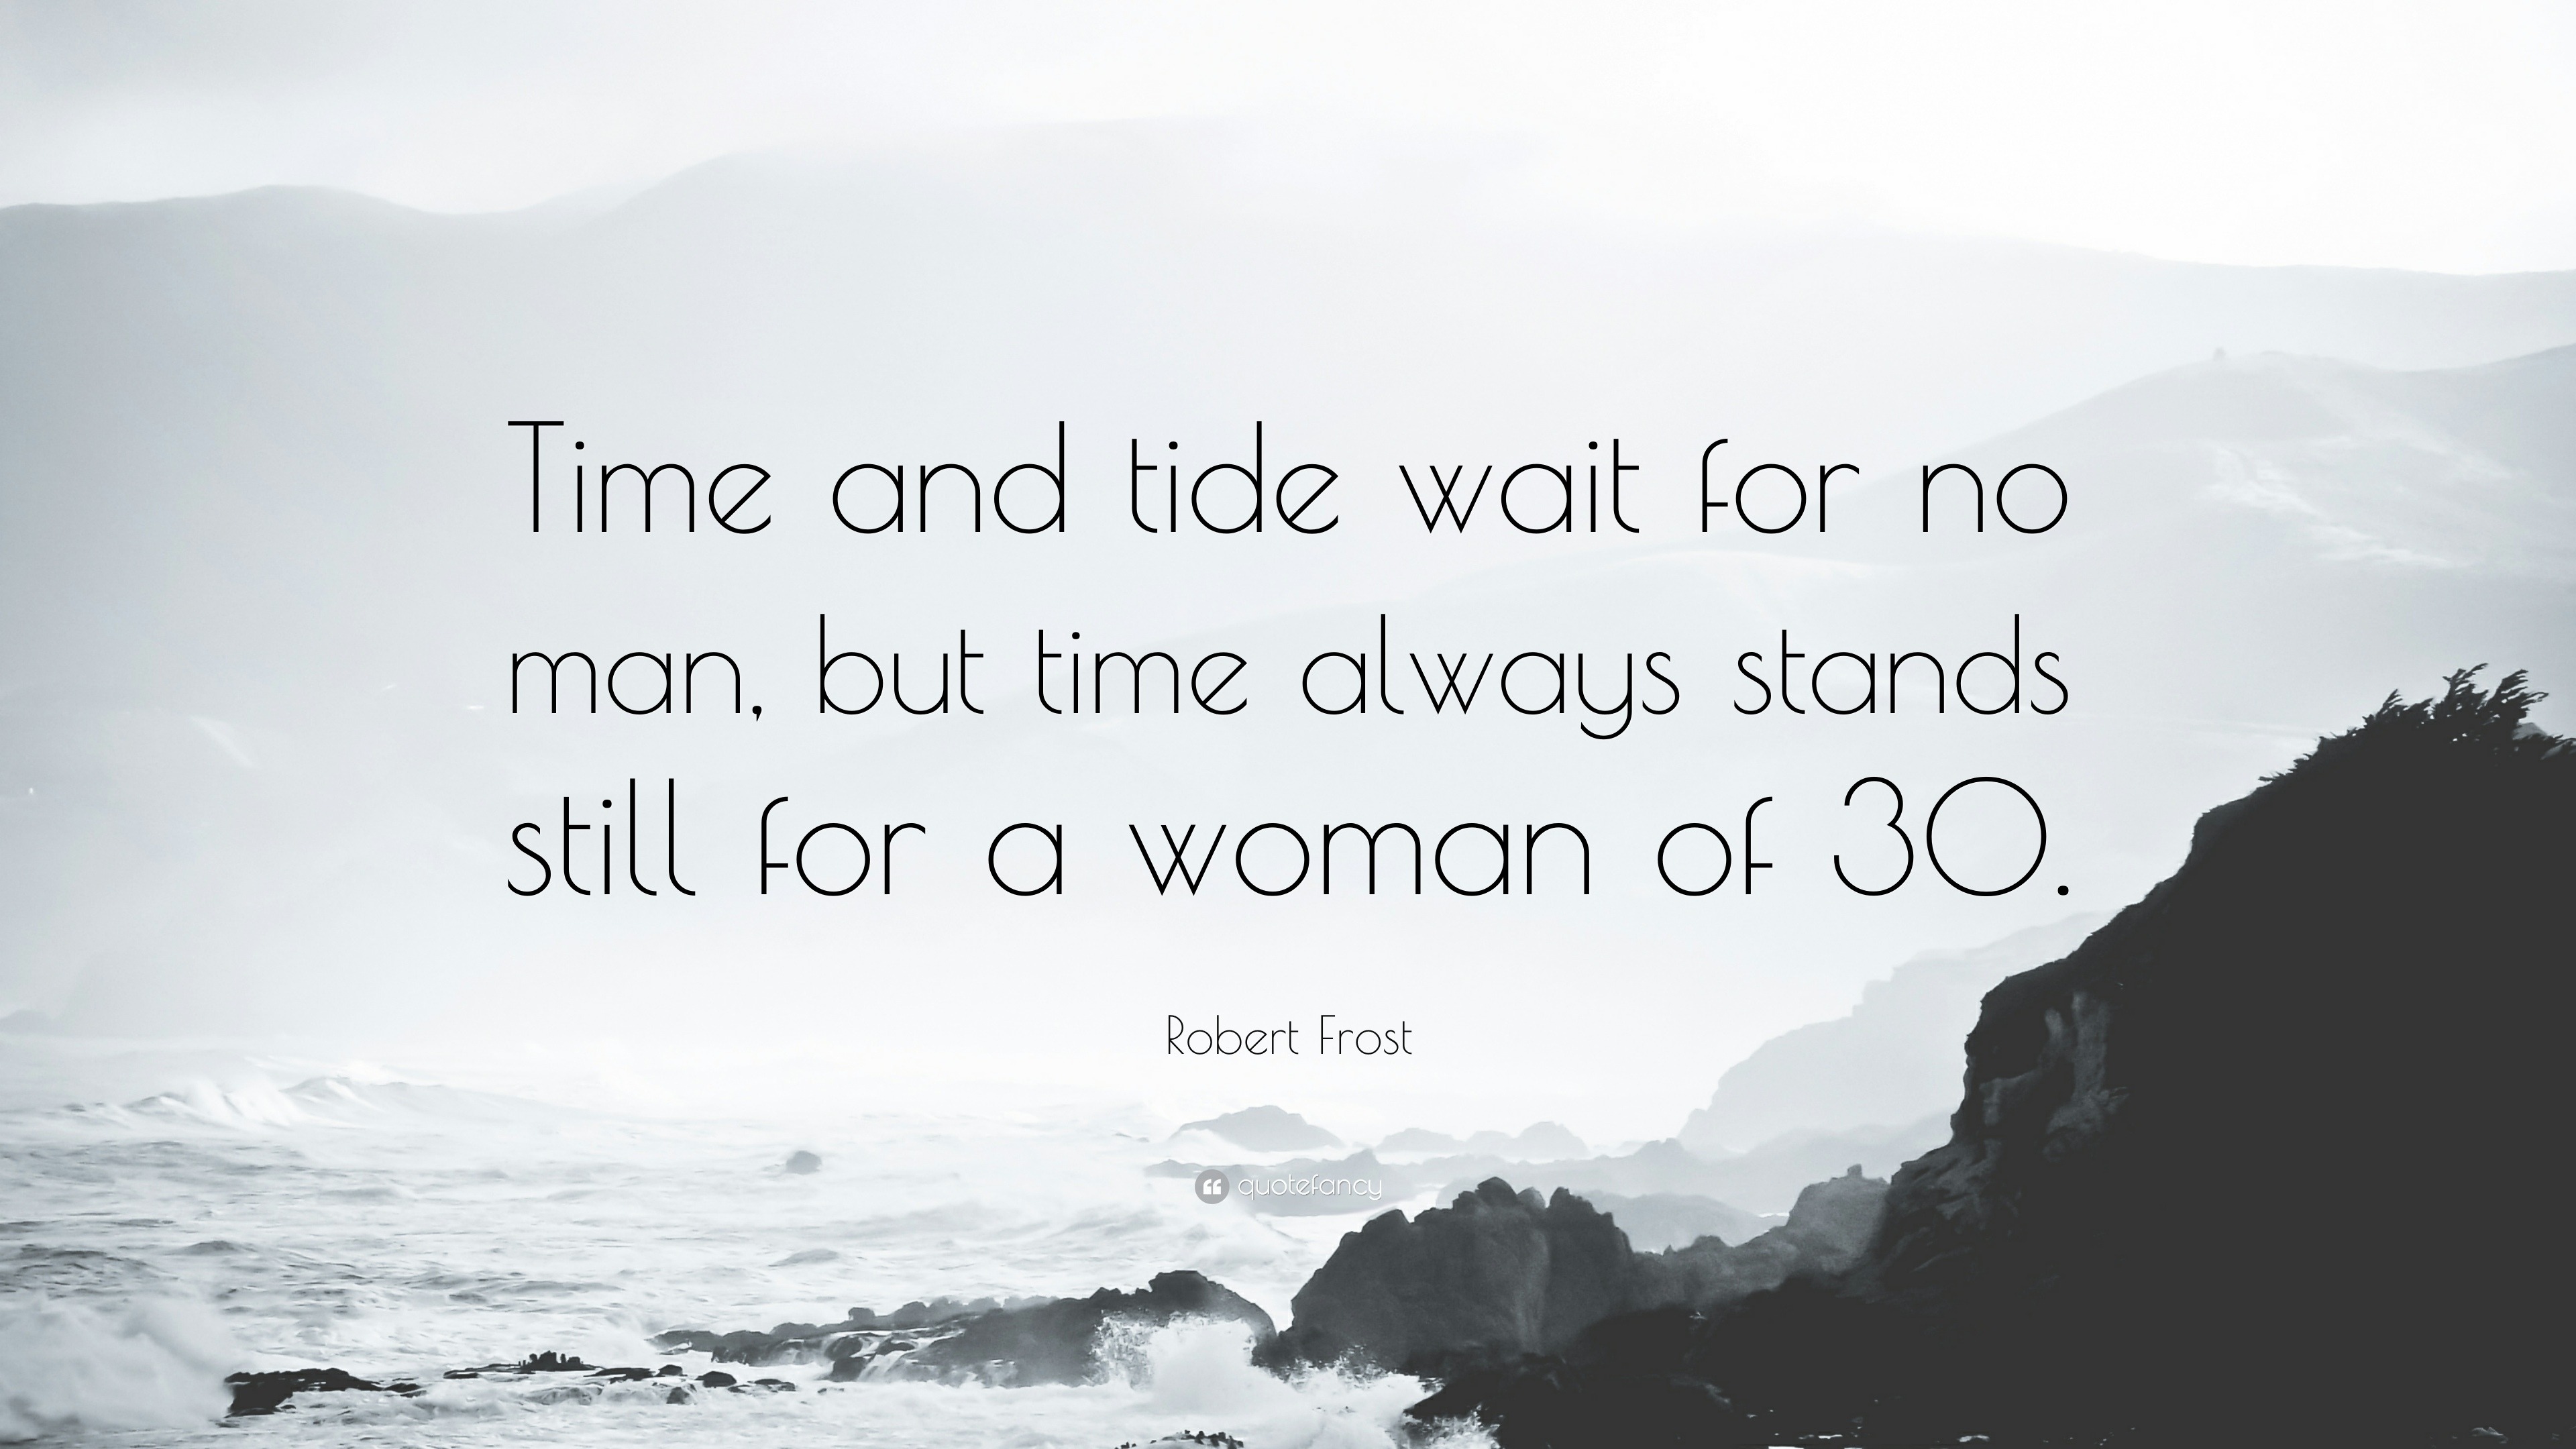 Robert Frost Quote “Time and tide wait for no man but time always